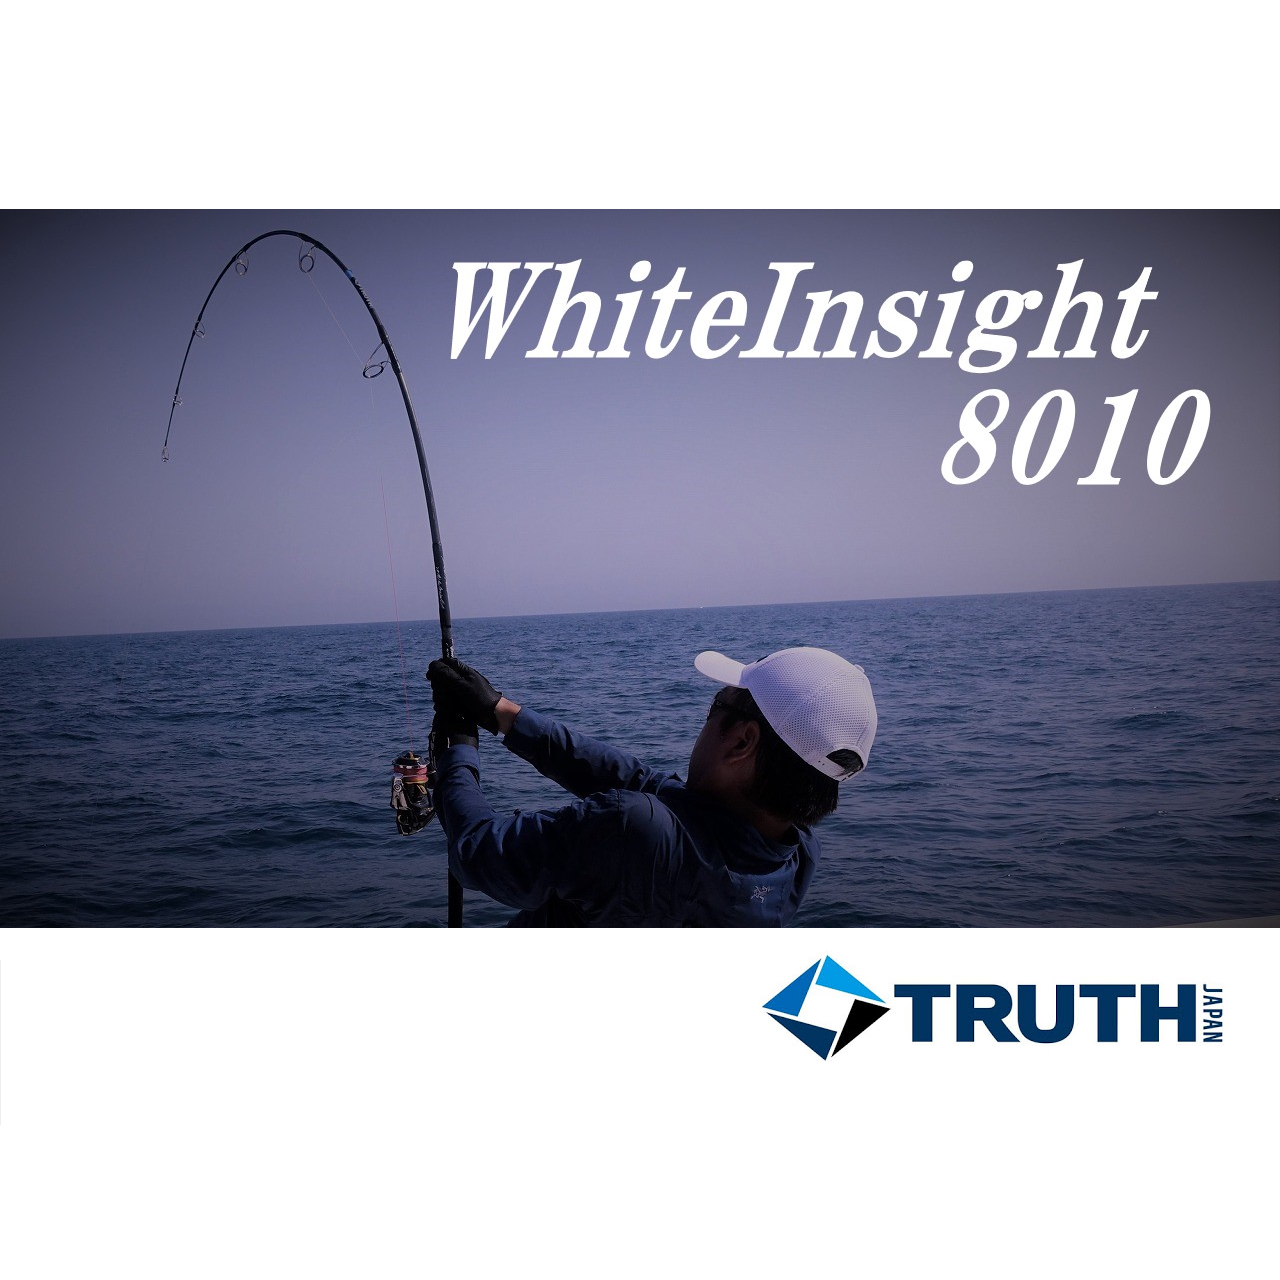 TRUTH JAPAN Whiteinsight 8010